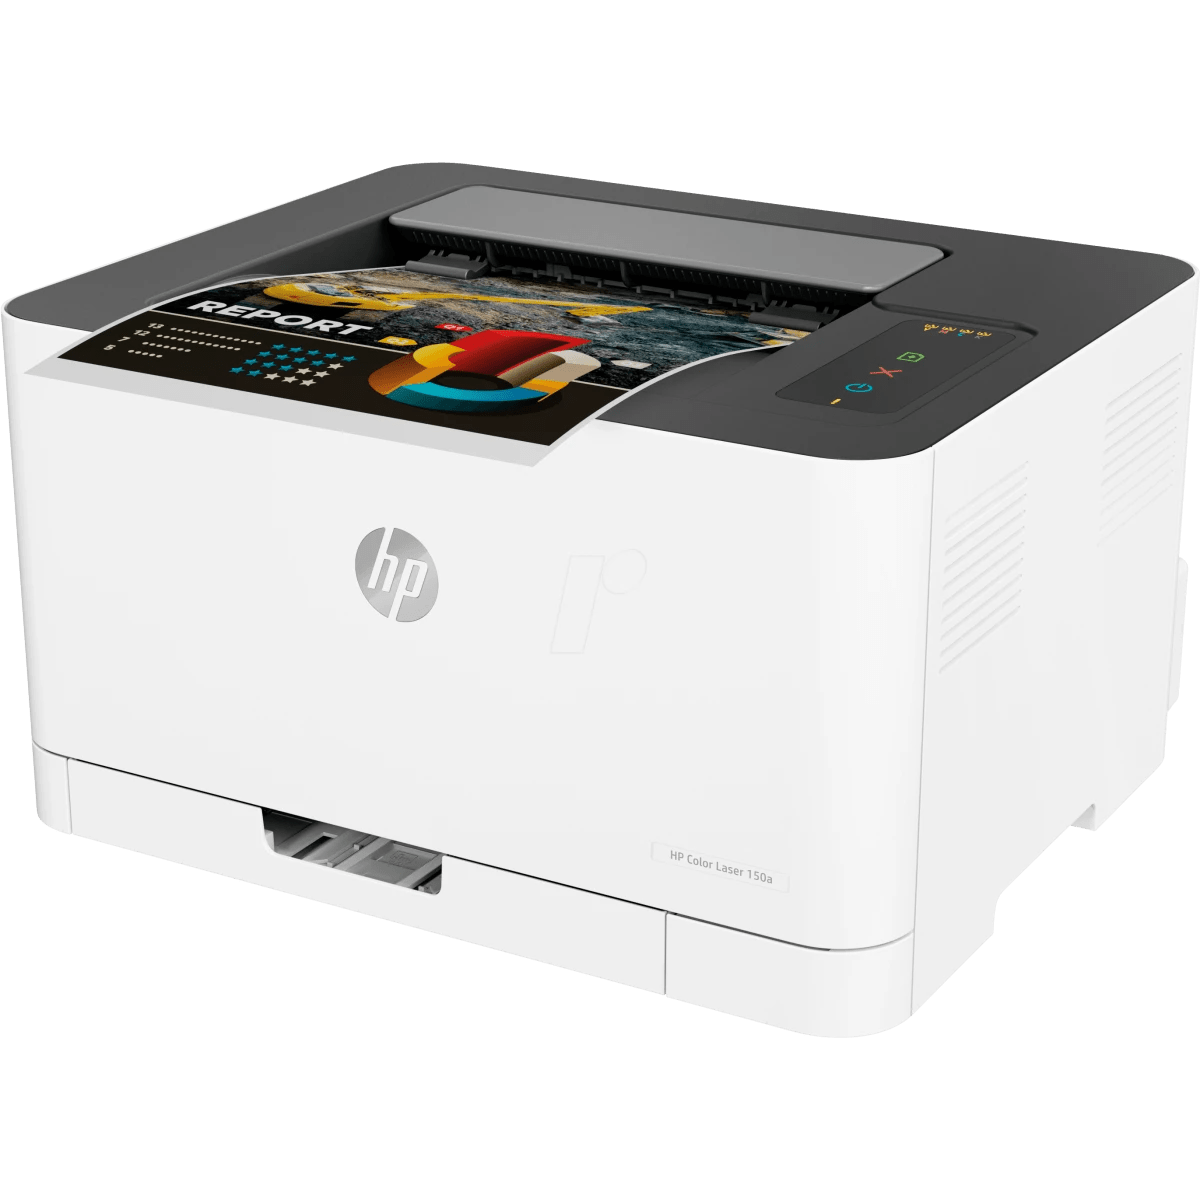 HP Printers HP Color Laser 150a A4 Color Laser Printer For Home & Office up to 18 black /4 Color PPM USB Interface - White